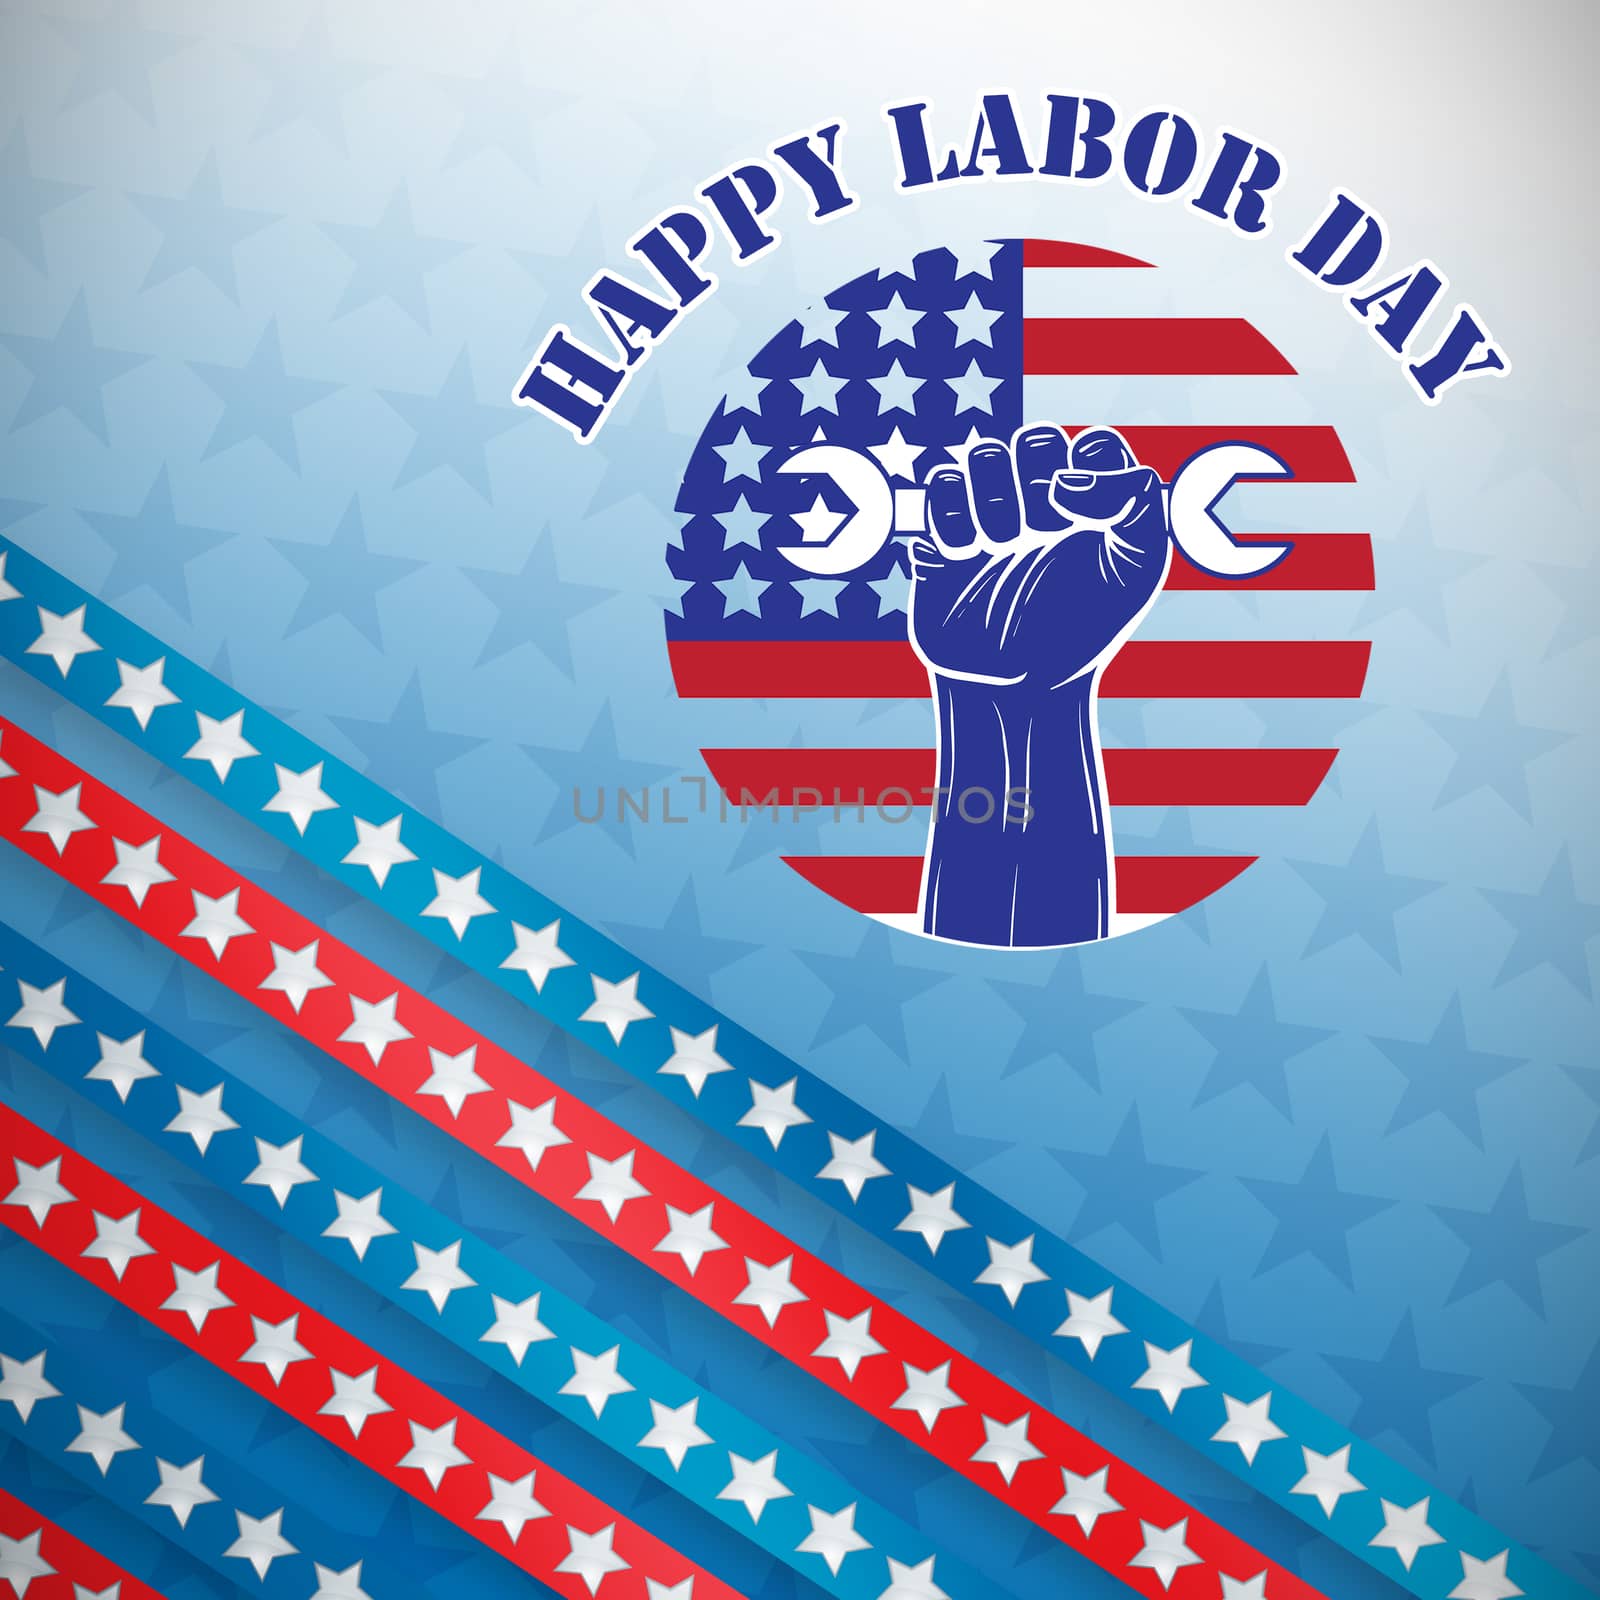 Happy labor day text over cropped hand holding tools against stars in a blue background 